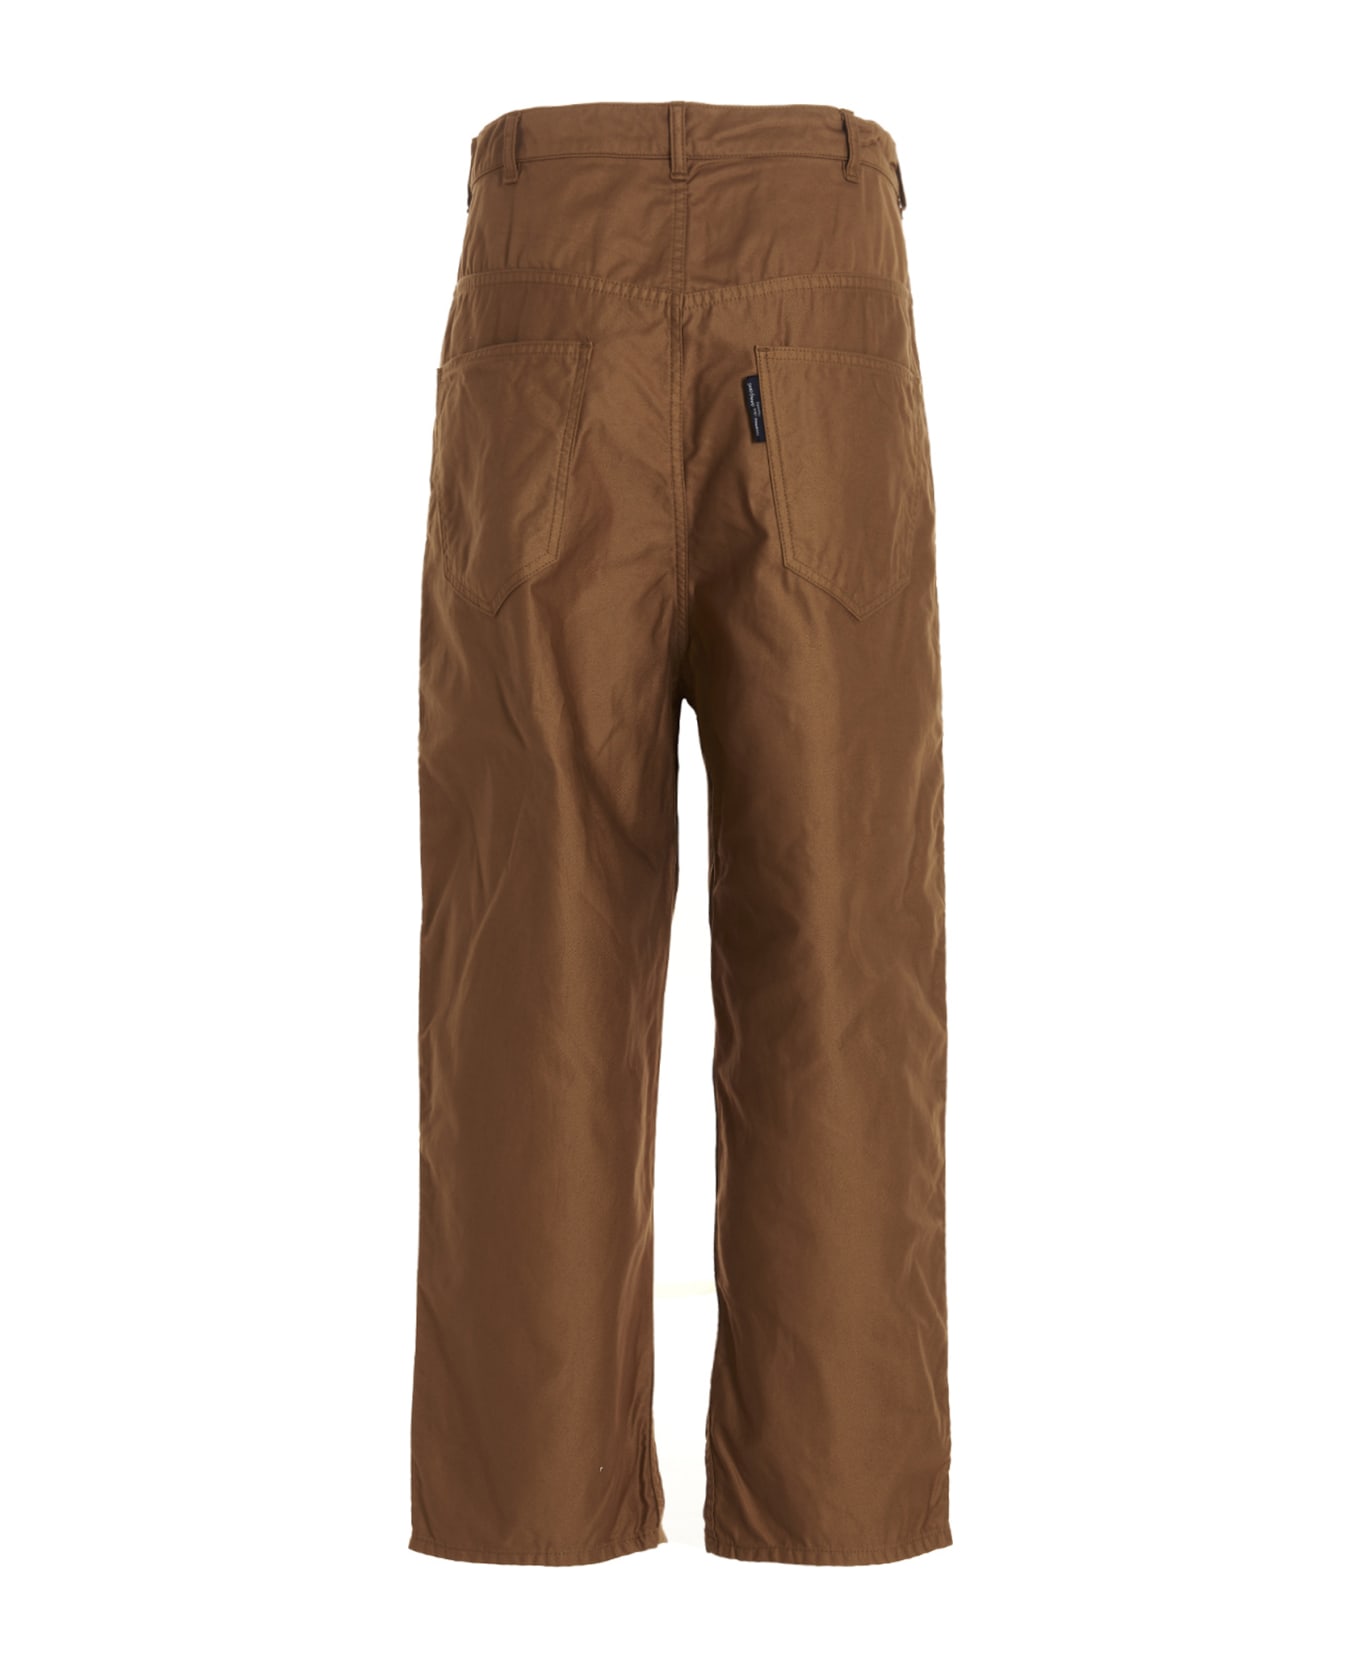 Comme des Garçons Homme Relaxed Chinos - Beige